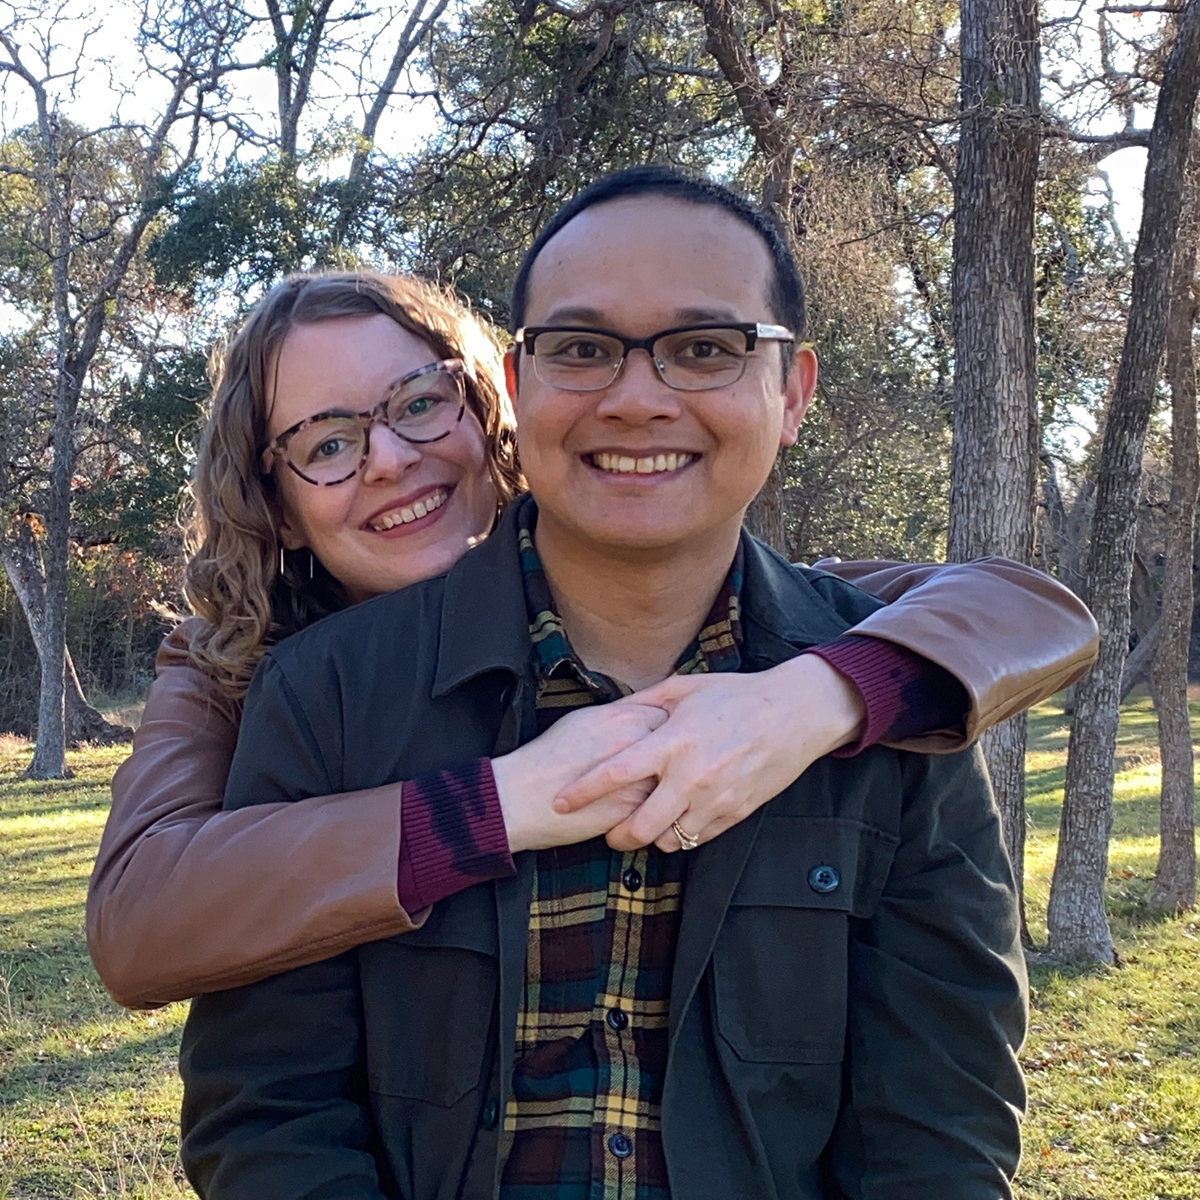 cedar park married couple looking to adopt